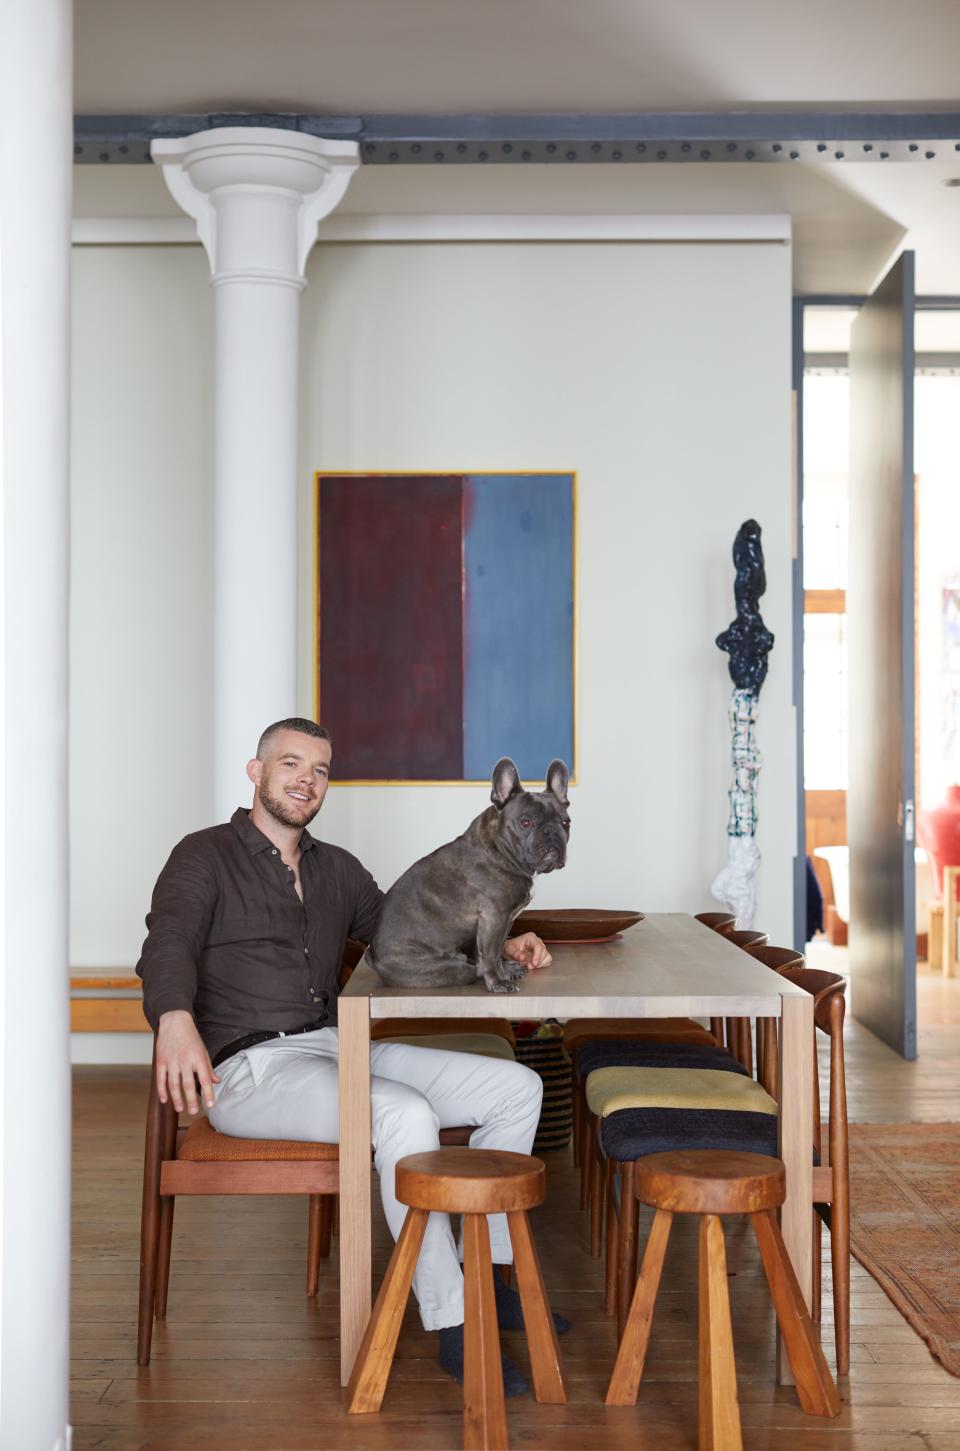 Tovey sits with his sidekick Rocky at the Holborn dining table by e15, which he has mixed with two vintage oak stools from the Peanut Vendor and midcentury chairs that he has collected from a variety of places over the years and had upholstered in a in a selection of Kvadrat fabrics in different colors. In the background is a wooden bench by iconic French designer Charlotte Perriand. Behind him hangs a painting by Matt Connors, next to a sculpture by Rebecca Warren.